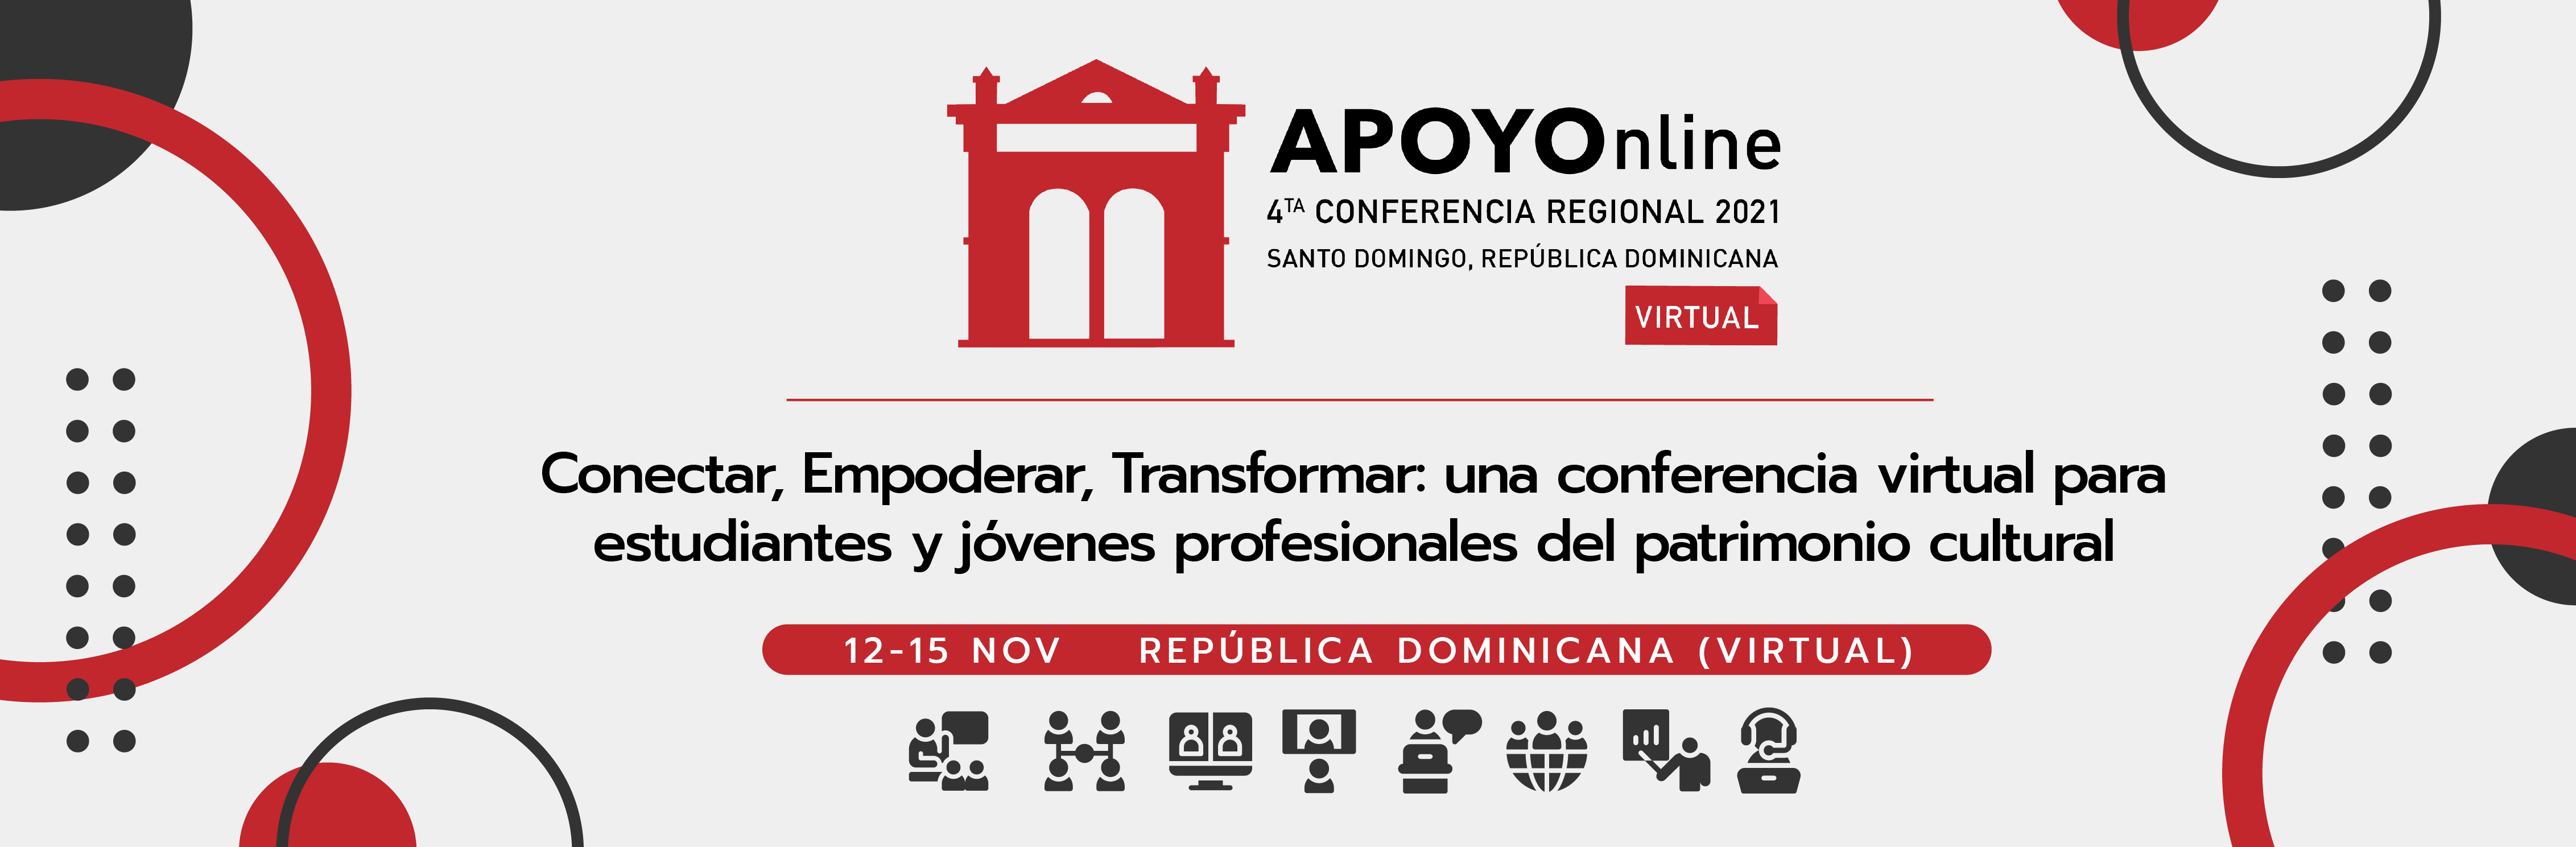 APOYO Conference Banner